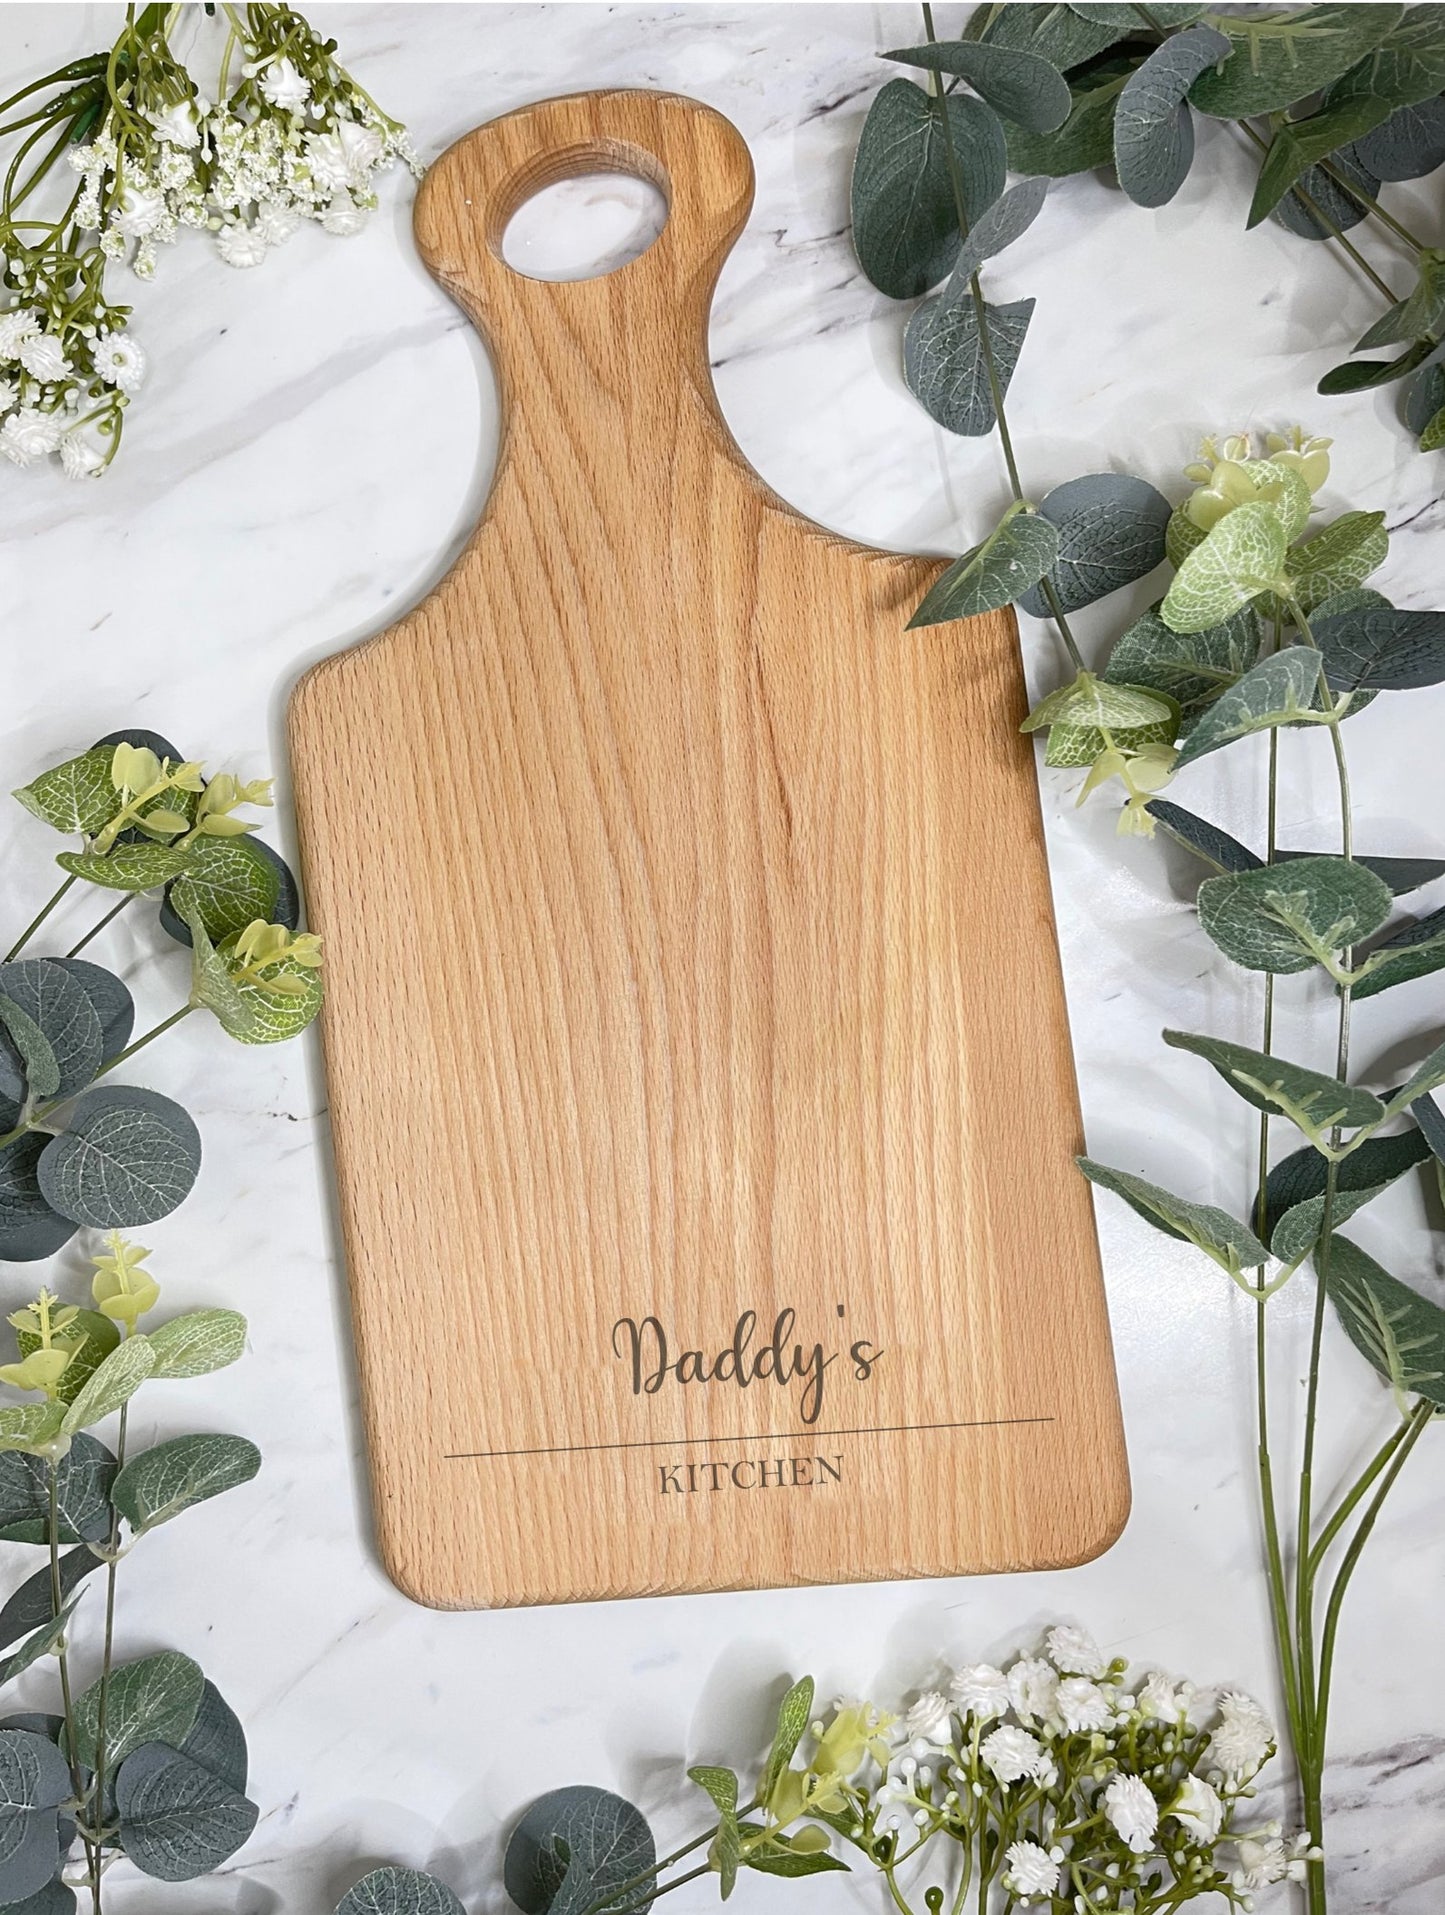 Thoughtful serving board gifts: Mother's Day, Father's Day, housewarmings, anniversaries, weddings, Christmas. Personalize up to 15-17 characters per line.